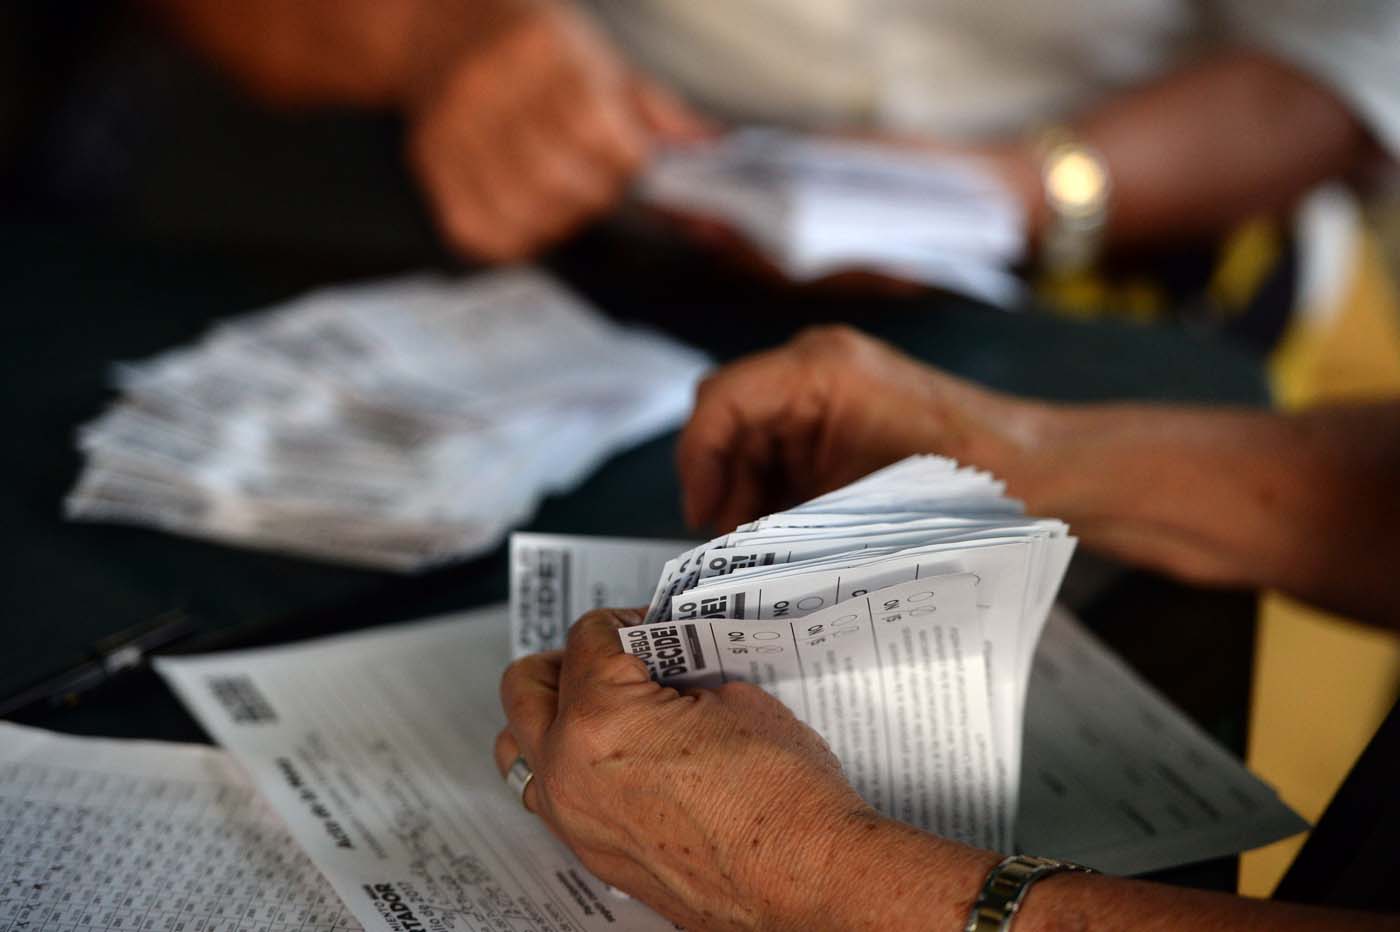 Volunteers count the ballots during an opposition-organized vote to measure public support for Venezuelan President Nicolas Maduro's plan to rewrite the constitution in Caracas on July 16, 2017. Authorities have refused to greenlight the vote that has been presented as an act of civil disobedience and supporters of Maduro are boycotting it. Protests against Maduro since April 1 have brought thousands to the streets demanding elections, but has also left 95 people dead, according to an official toll.  / AFP PHOTO / Federico Parra